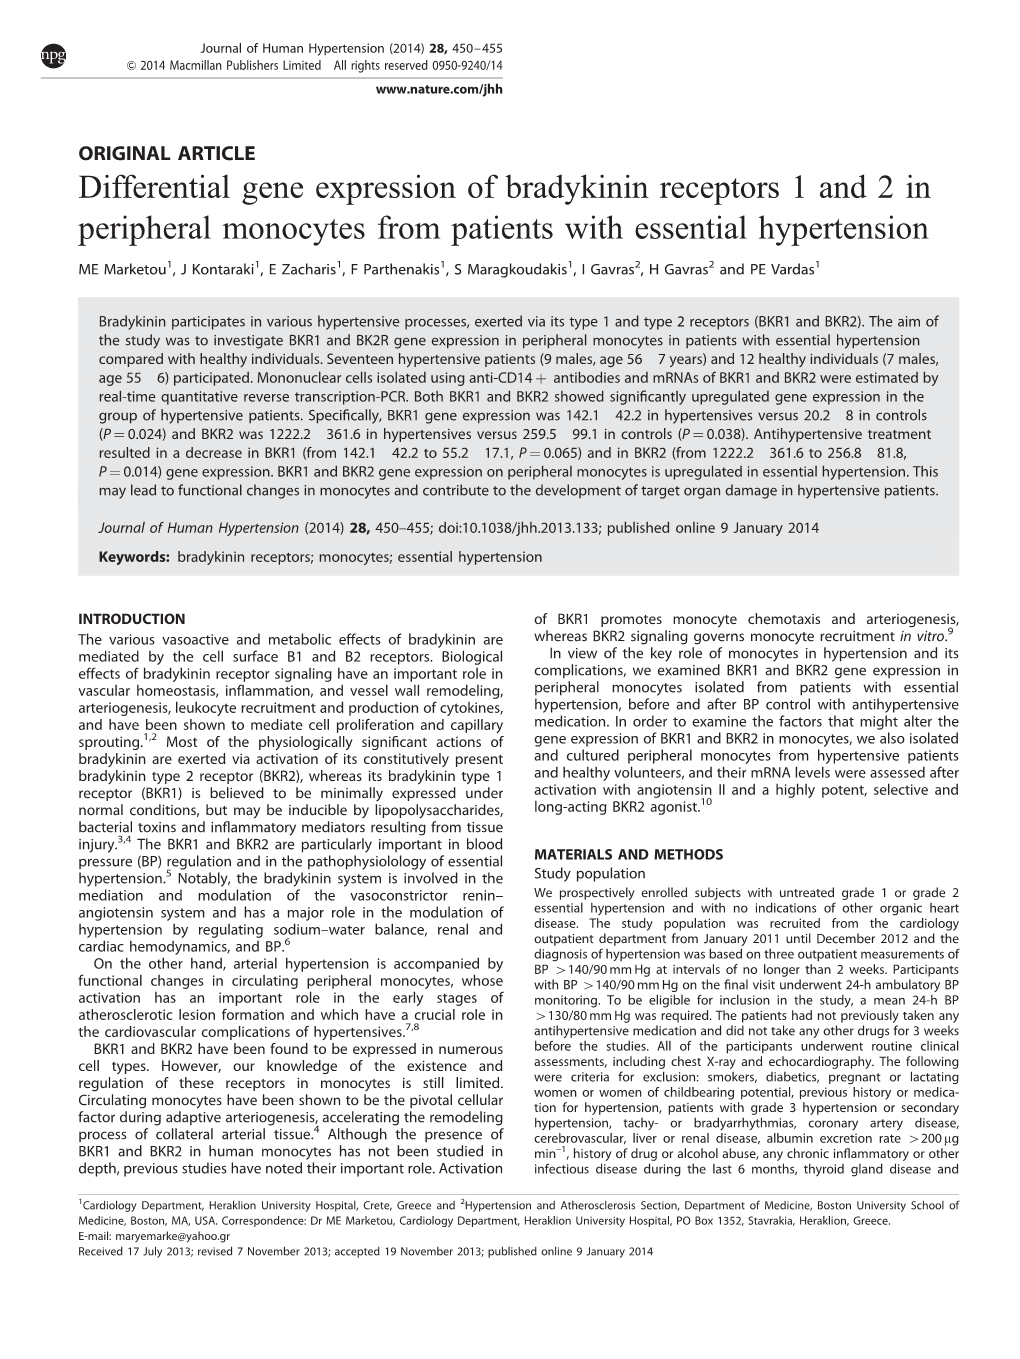 Differential Gene Expression of Bradykinin Receptors 1 and 2 in Peripheral Monocytes from Patients with Essential Hypertension